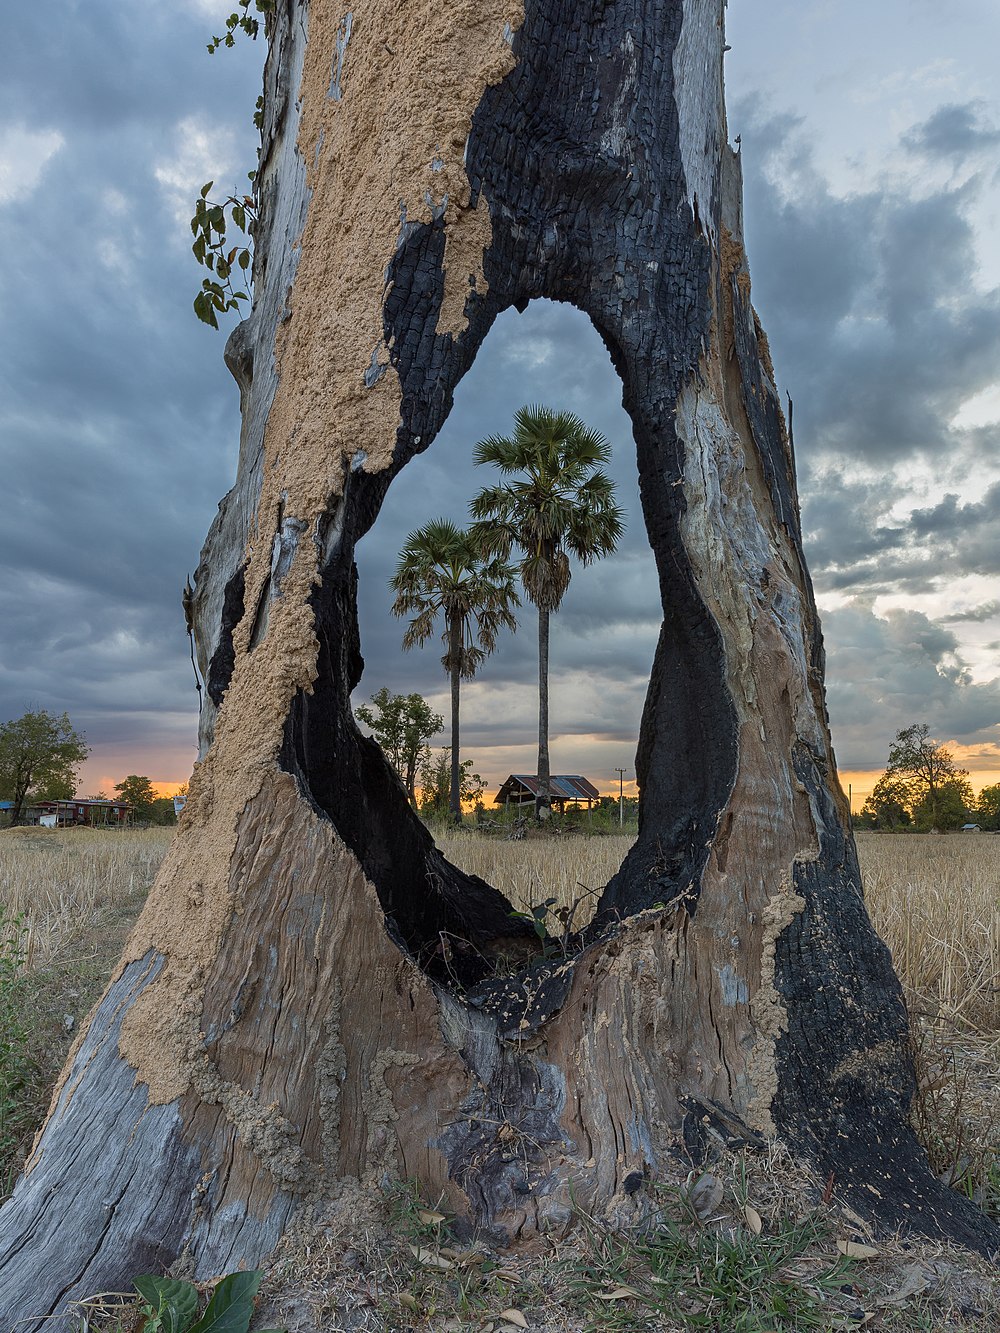 palm trees in the fields viewed through a hole in a tree trunk